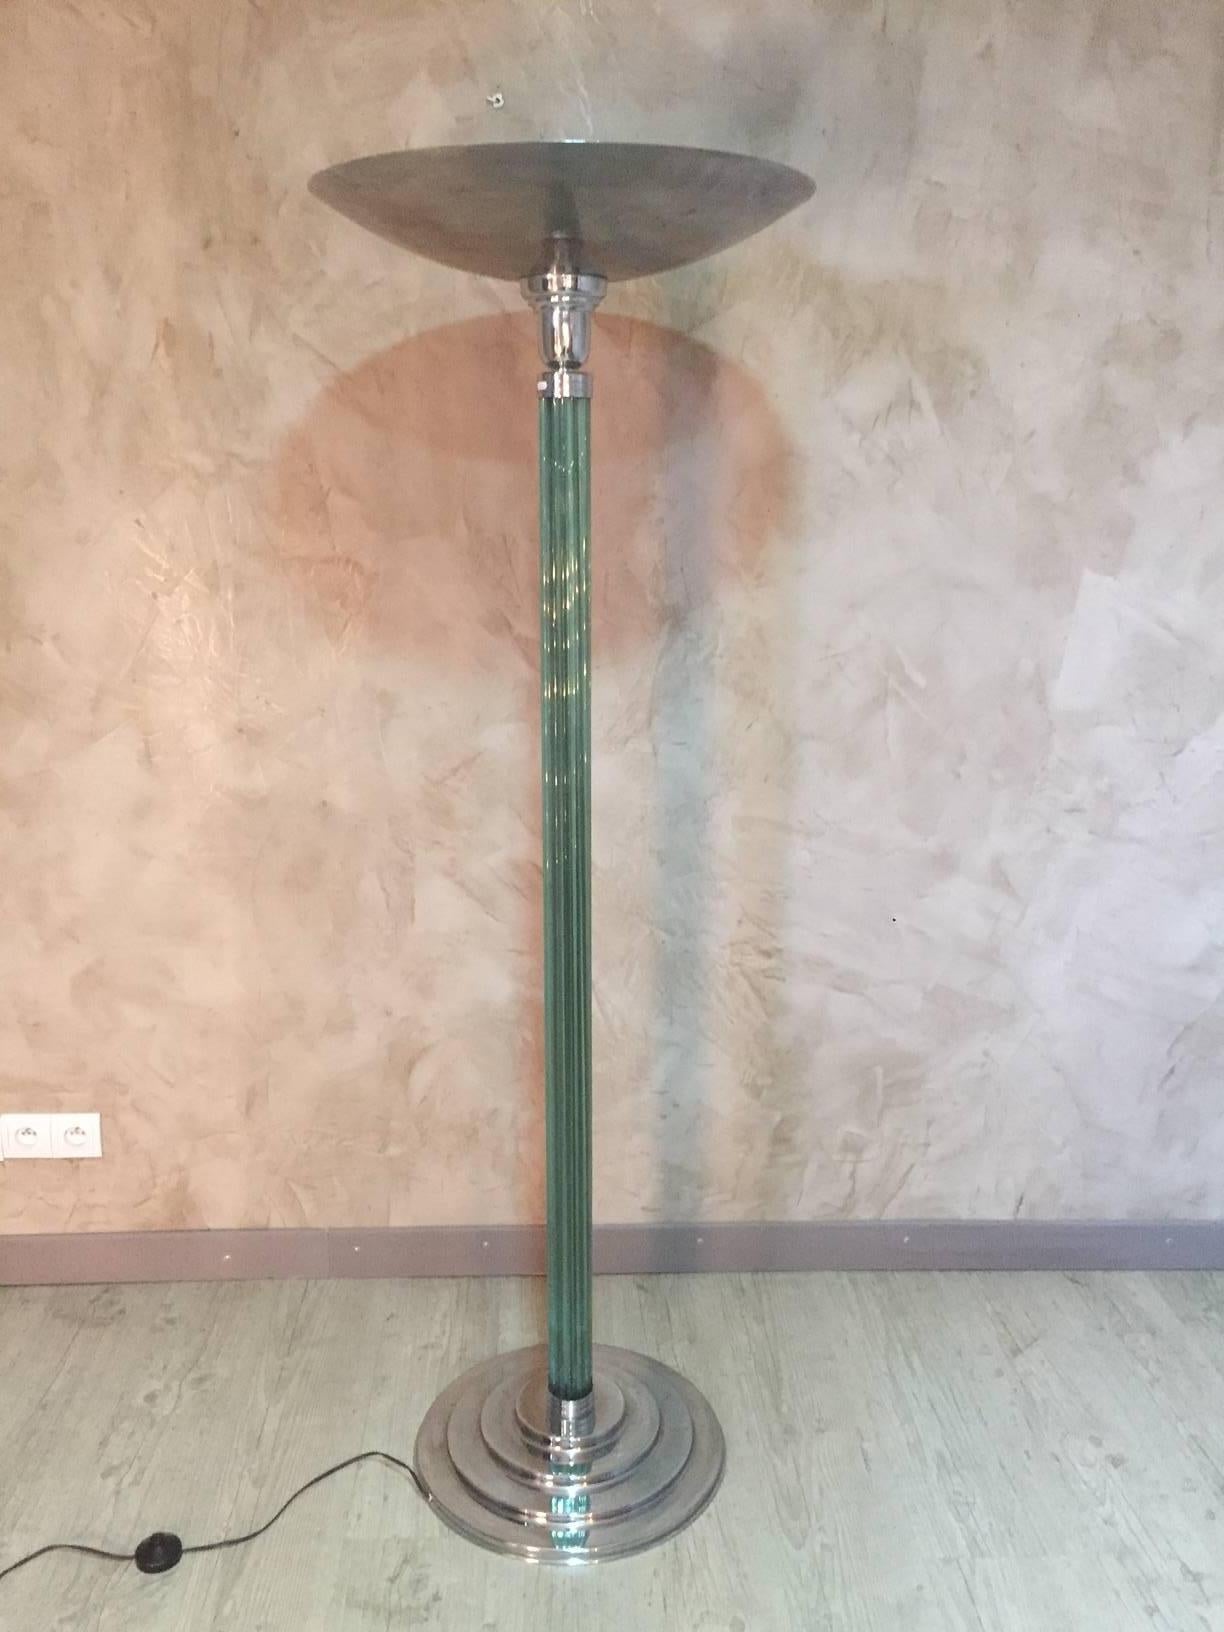 Very nice French Art Deco floor lamp from the 1930s. Tubular tinted glass. Chromed metal base and shade. One lightbulb. The glass is slightly tinted green.